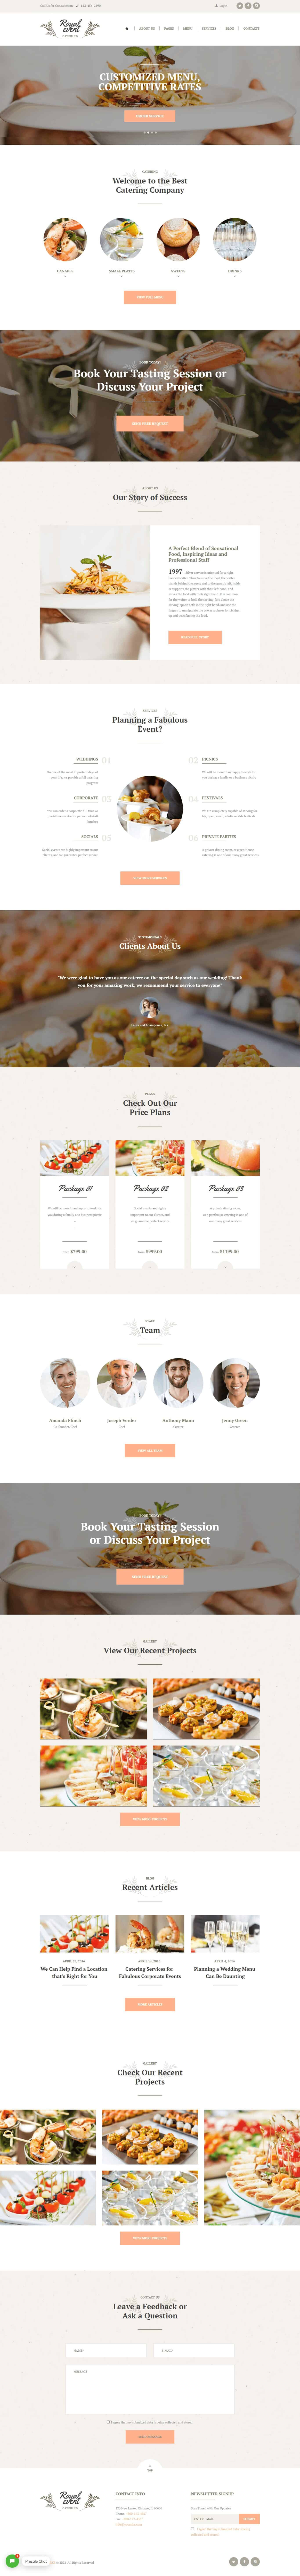 Catering Services Website Design And Development